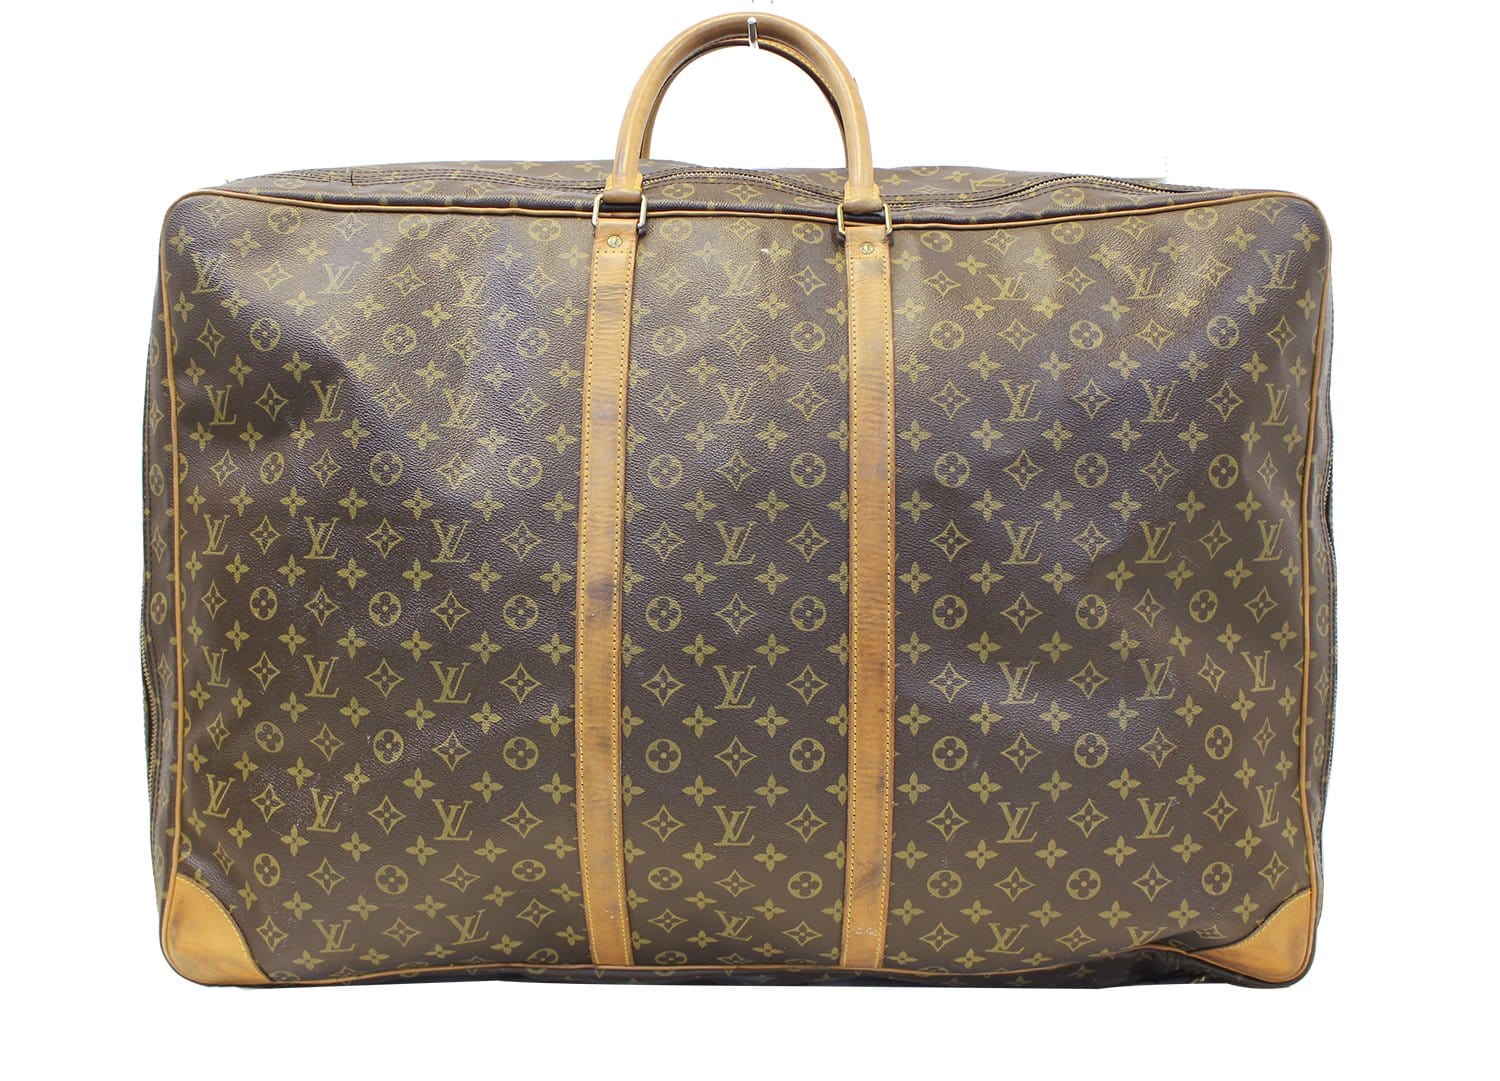 Louis Vuitton Carry All Soft Side Suitcase Weekender Luggage